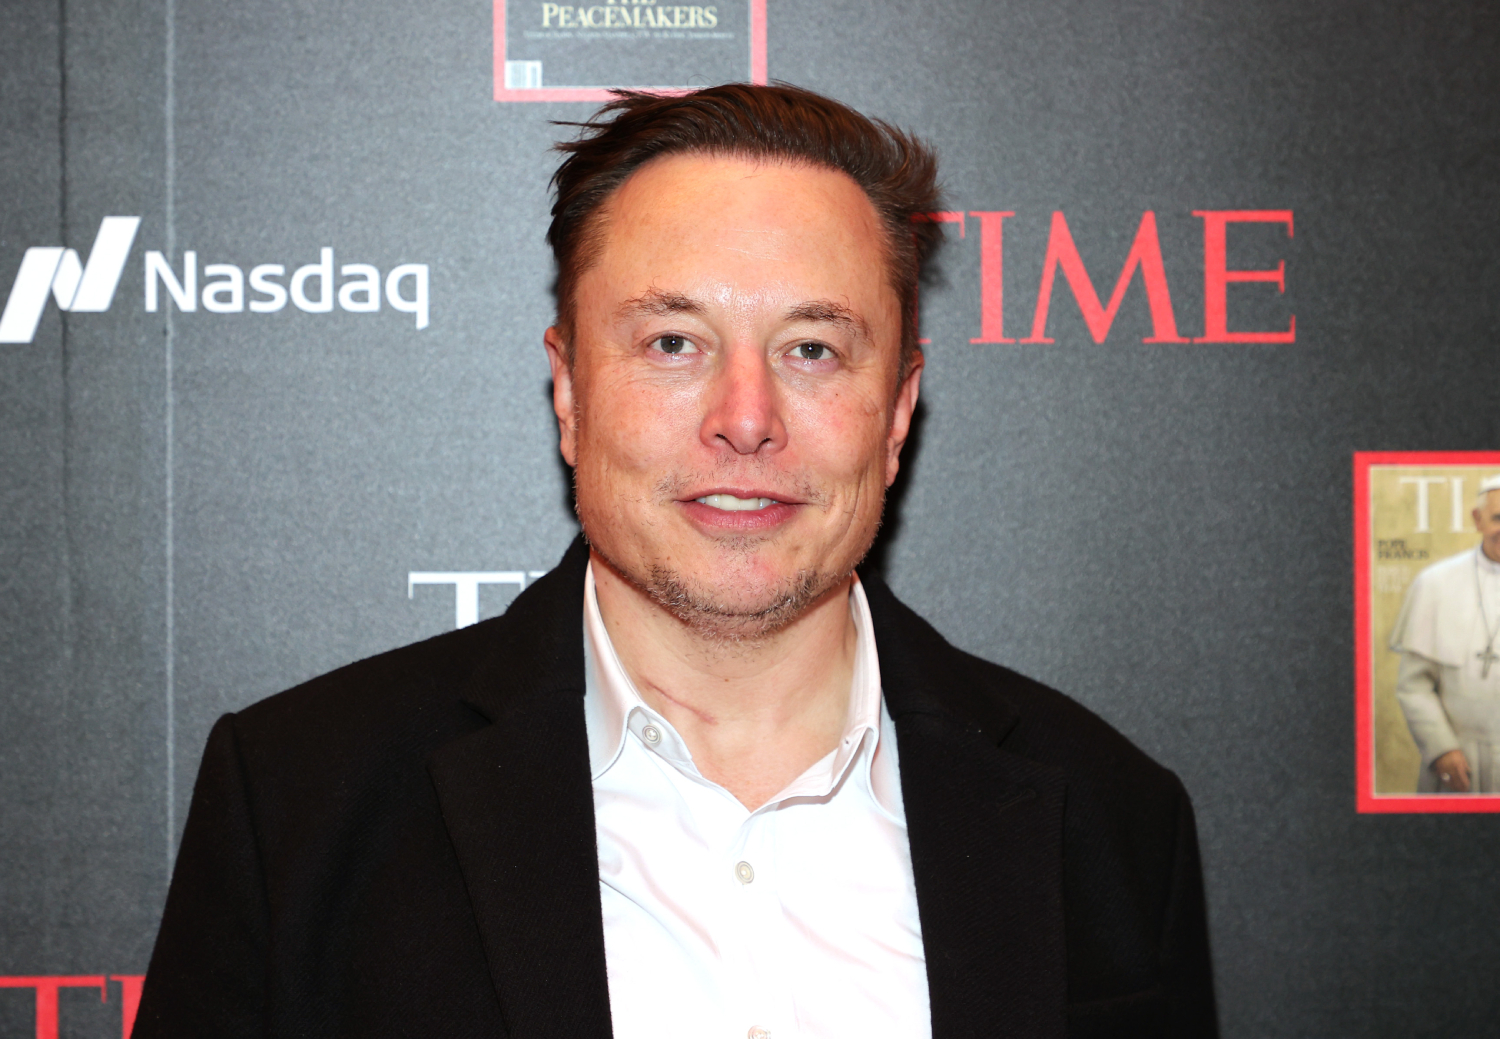 Elon Musk asked a student to stop tracking his plane